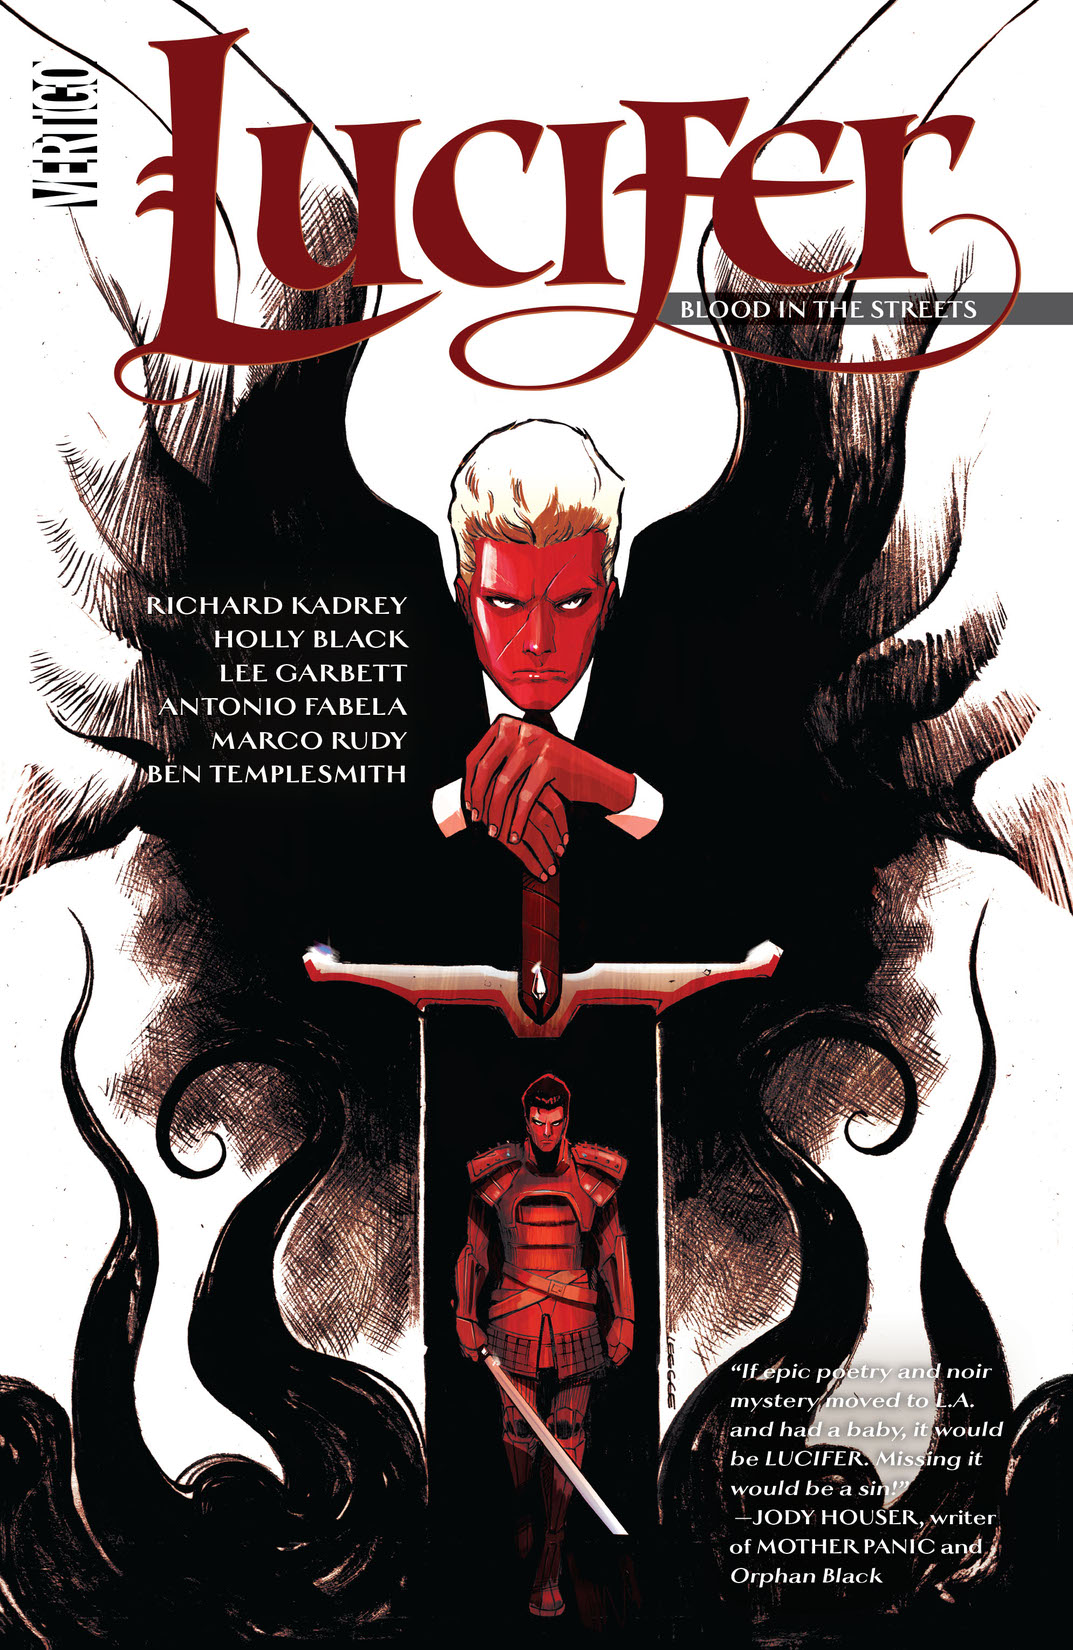 Lucifer Vol. 3: Blood in the Streets preview images